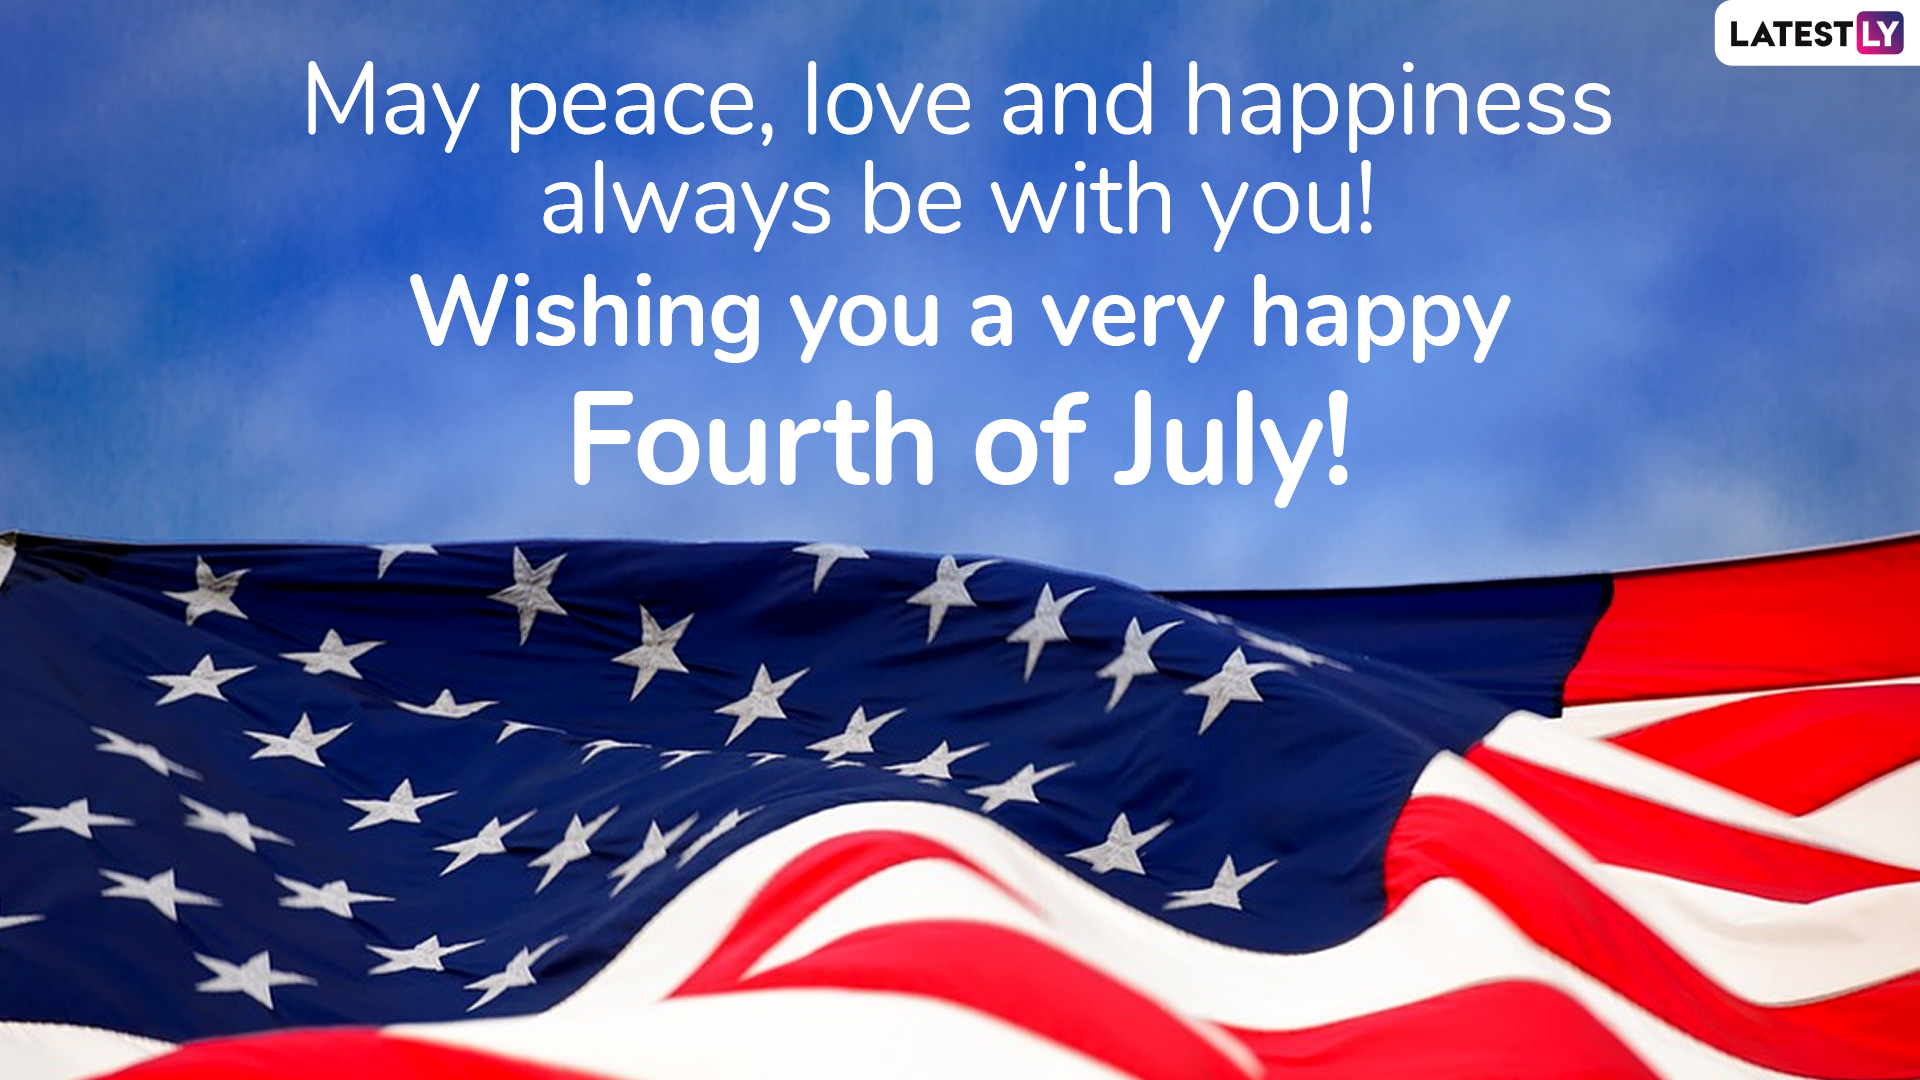 Happy Fourth of July 2019 Greetings WhatsApp Stickers, GIF Image